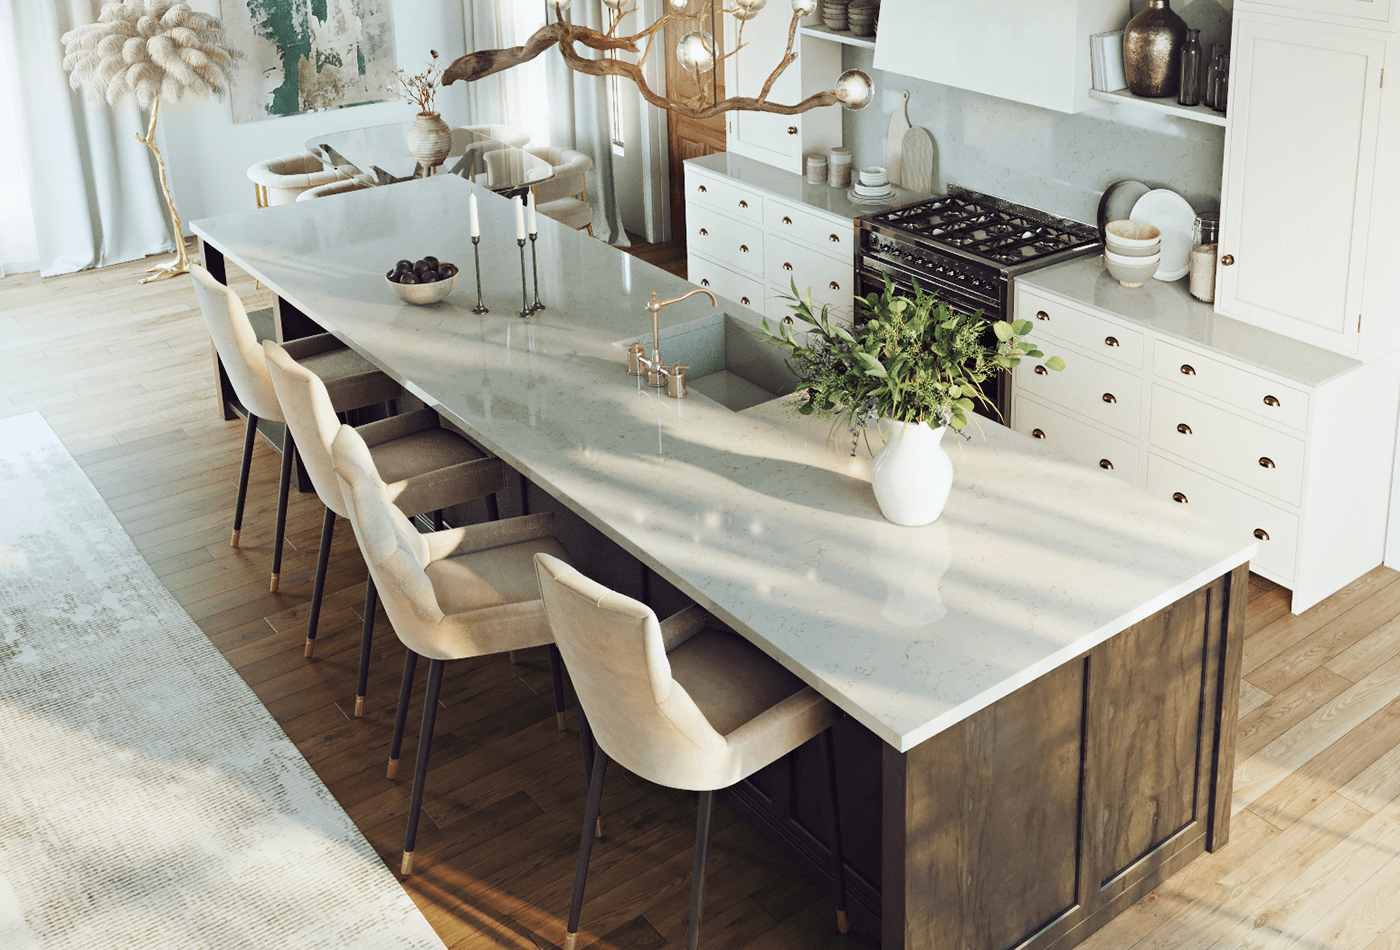 Best Kitchen Surface Material: Choose Wisely